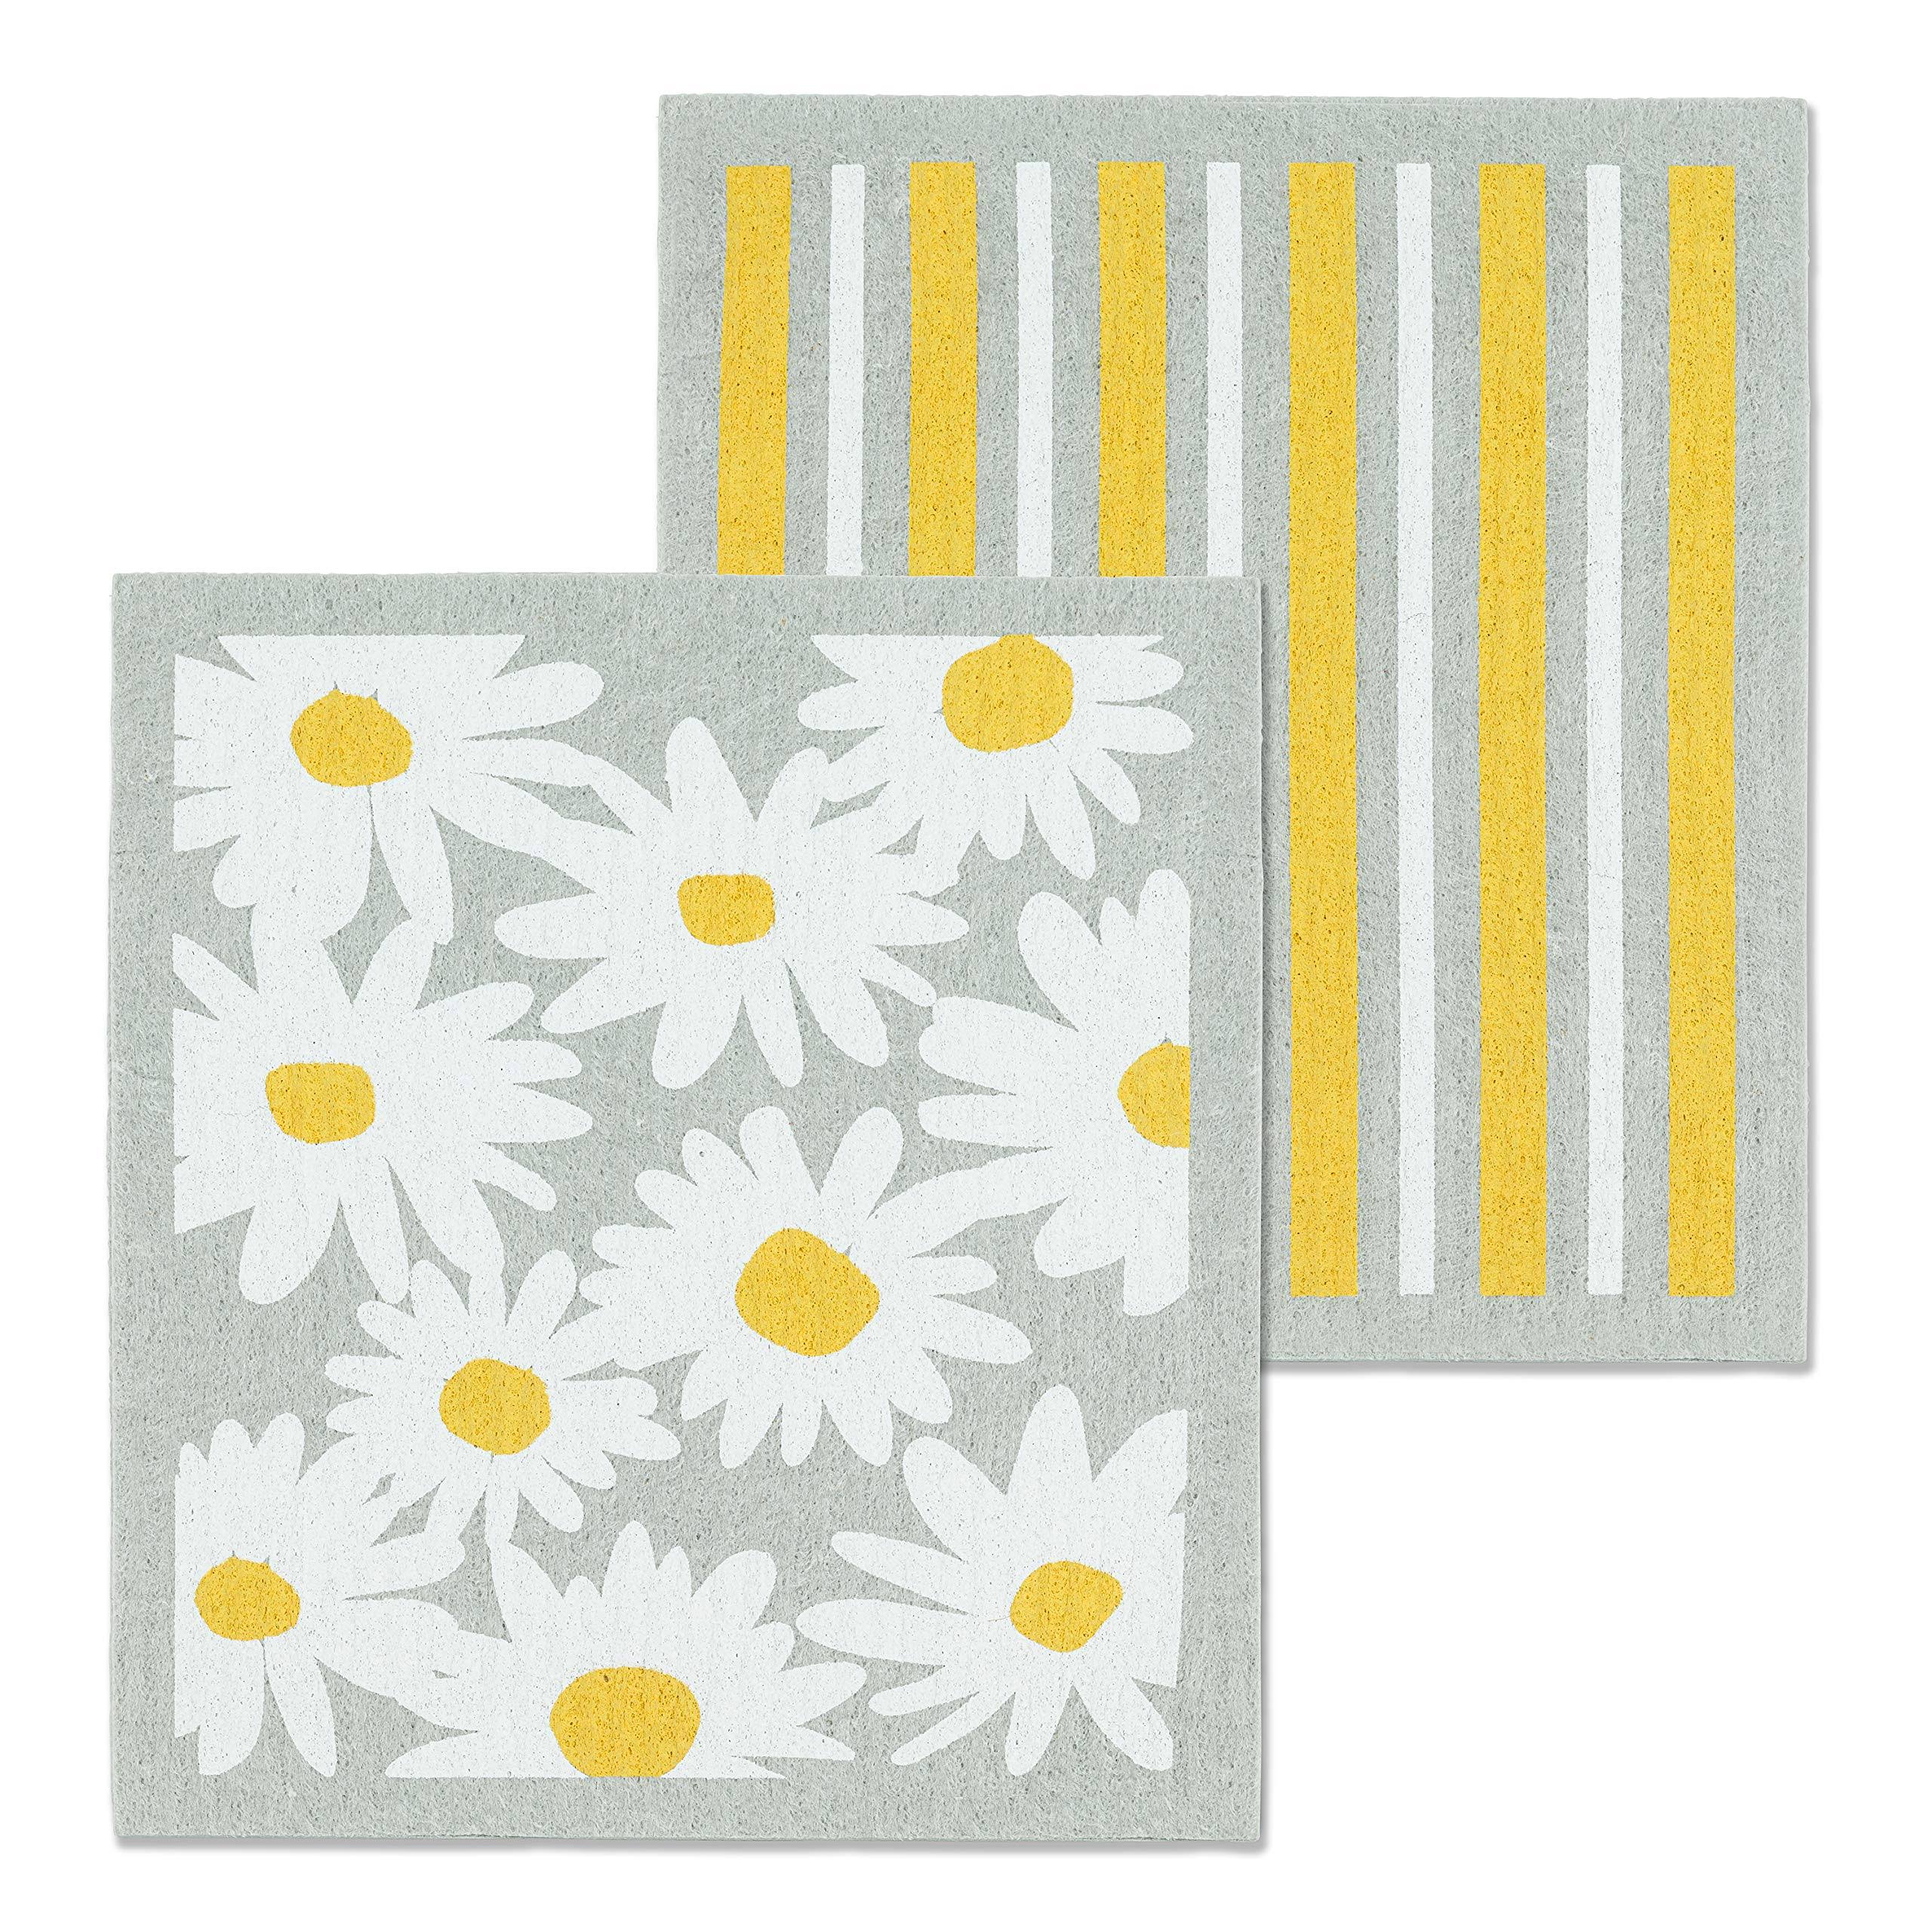 Abbott Collections AB-84-ASD-AB-51 6.5 x 8 in. Daisies & Stripes Dishcloths Grey & White - Set of 2